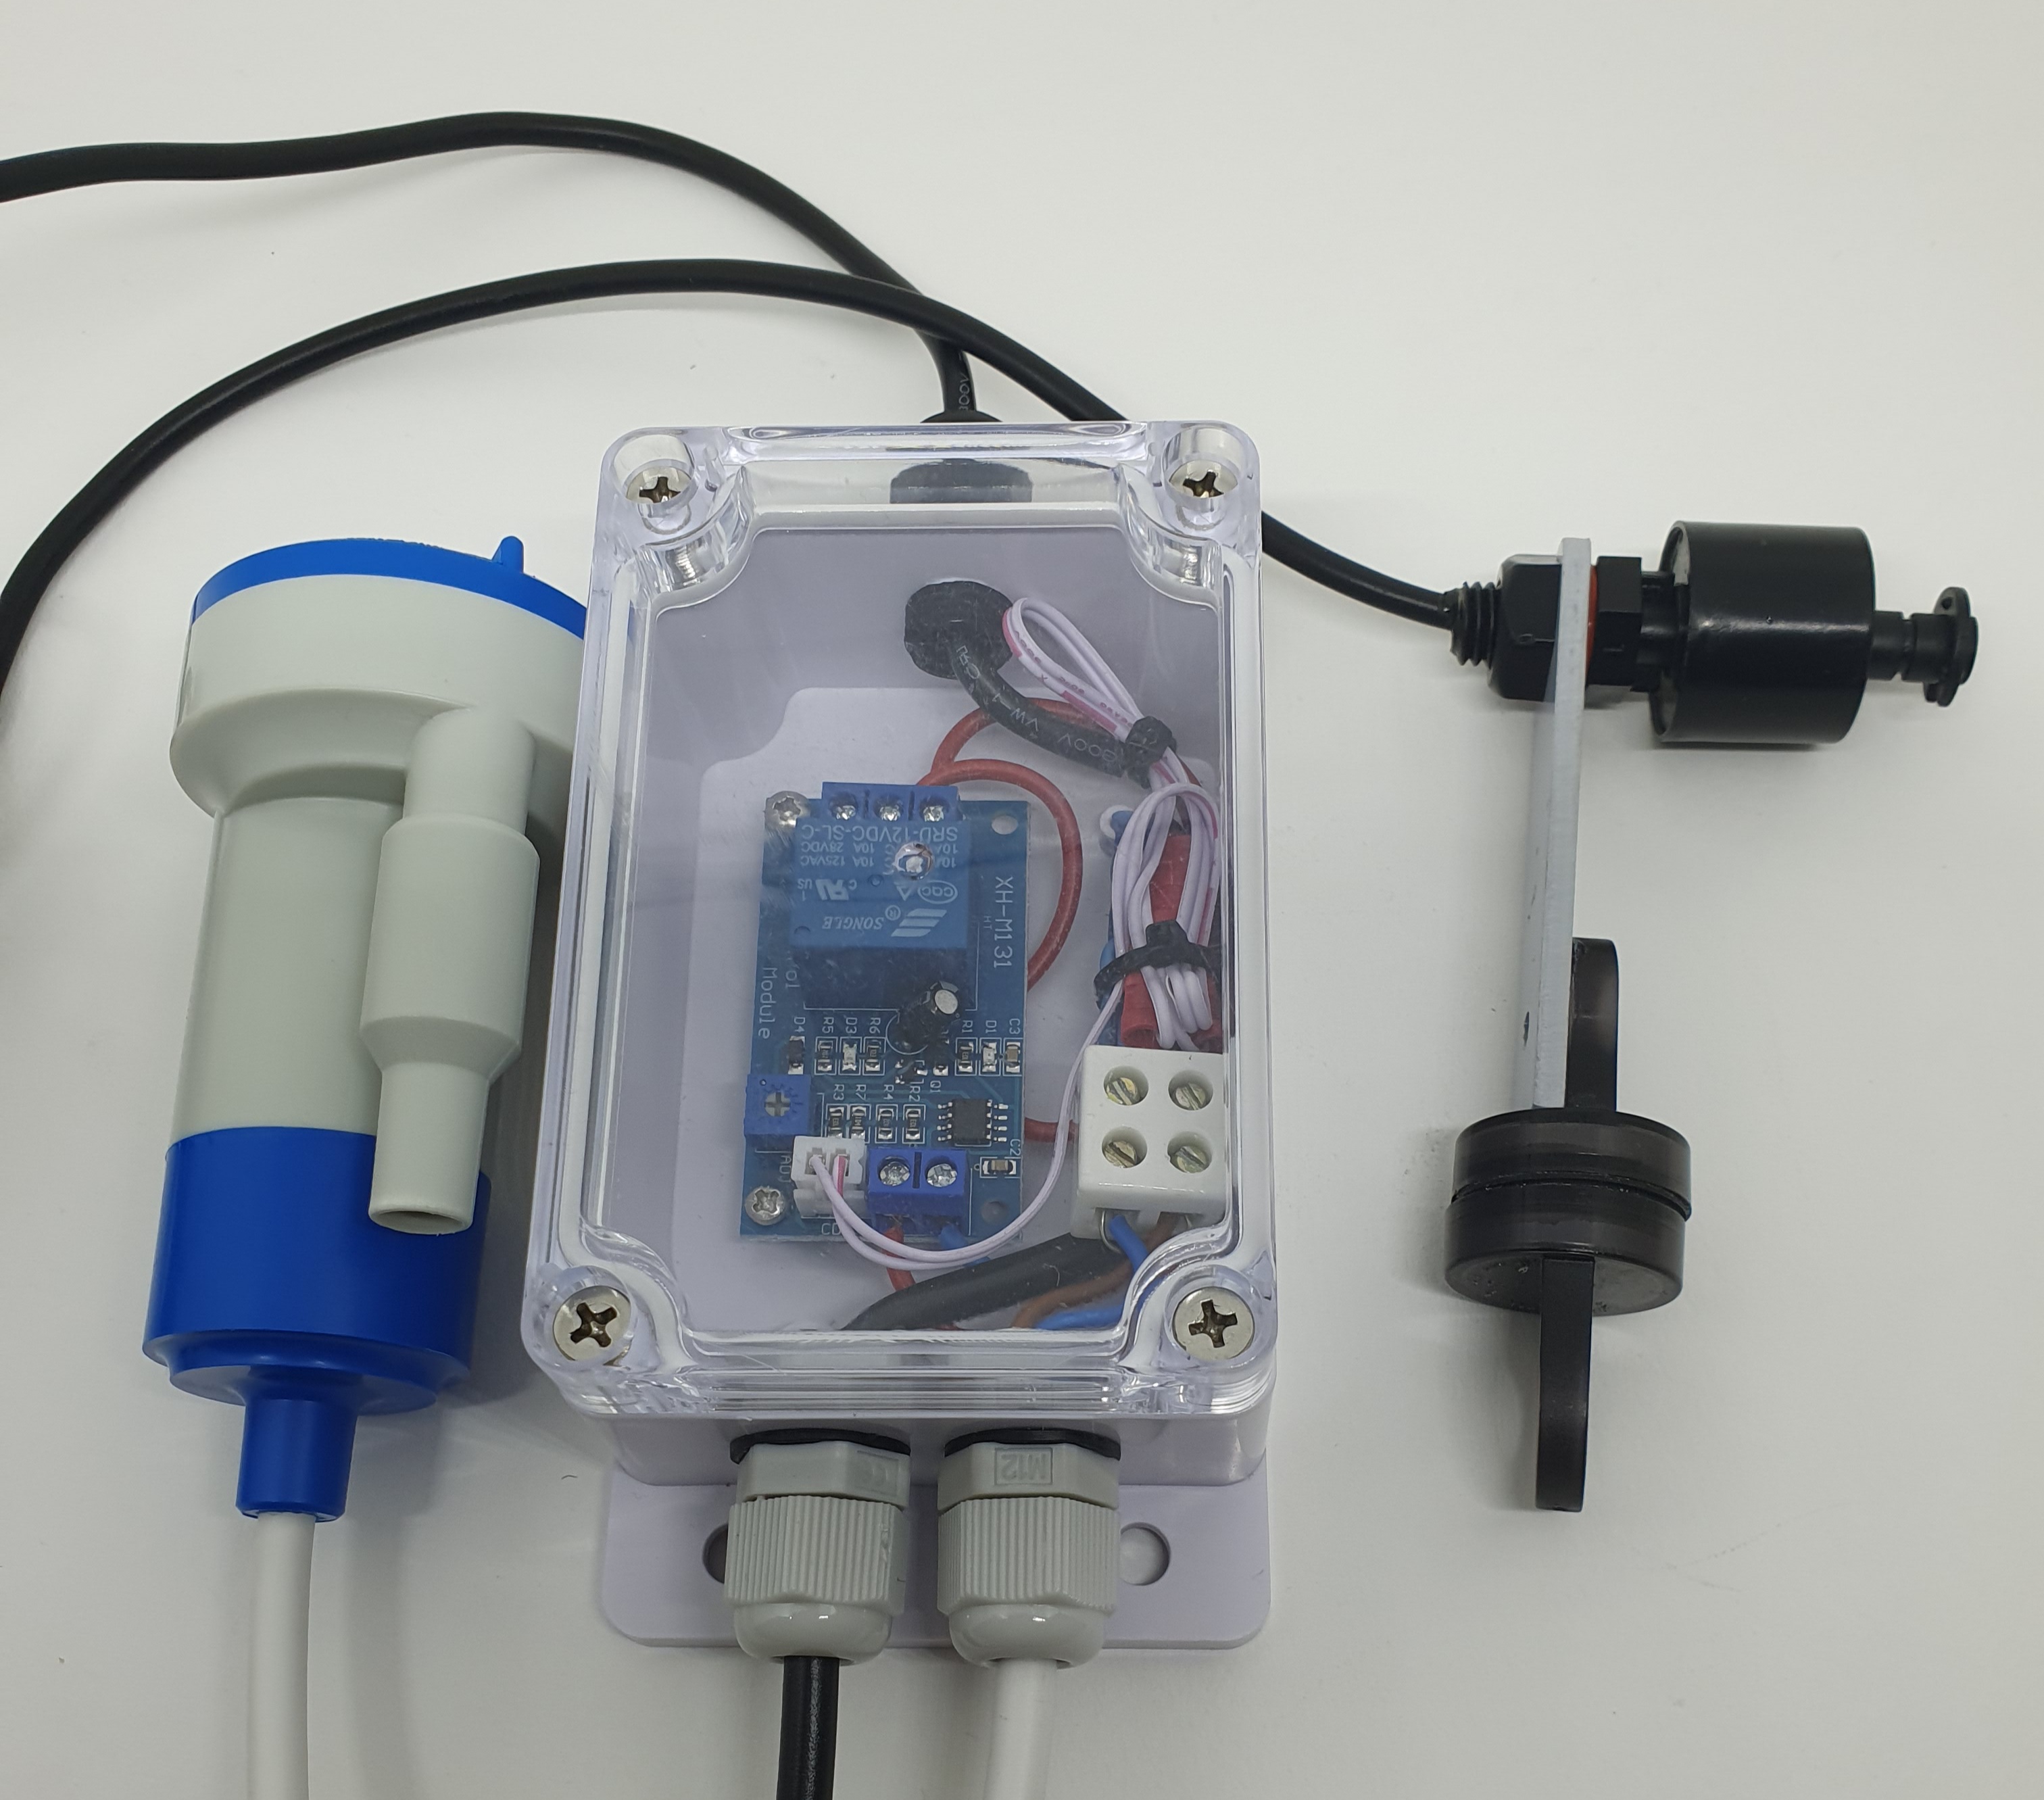 AquaLight Water level controller - waterproof (with pump and float